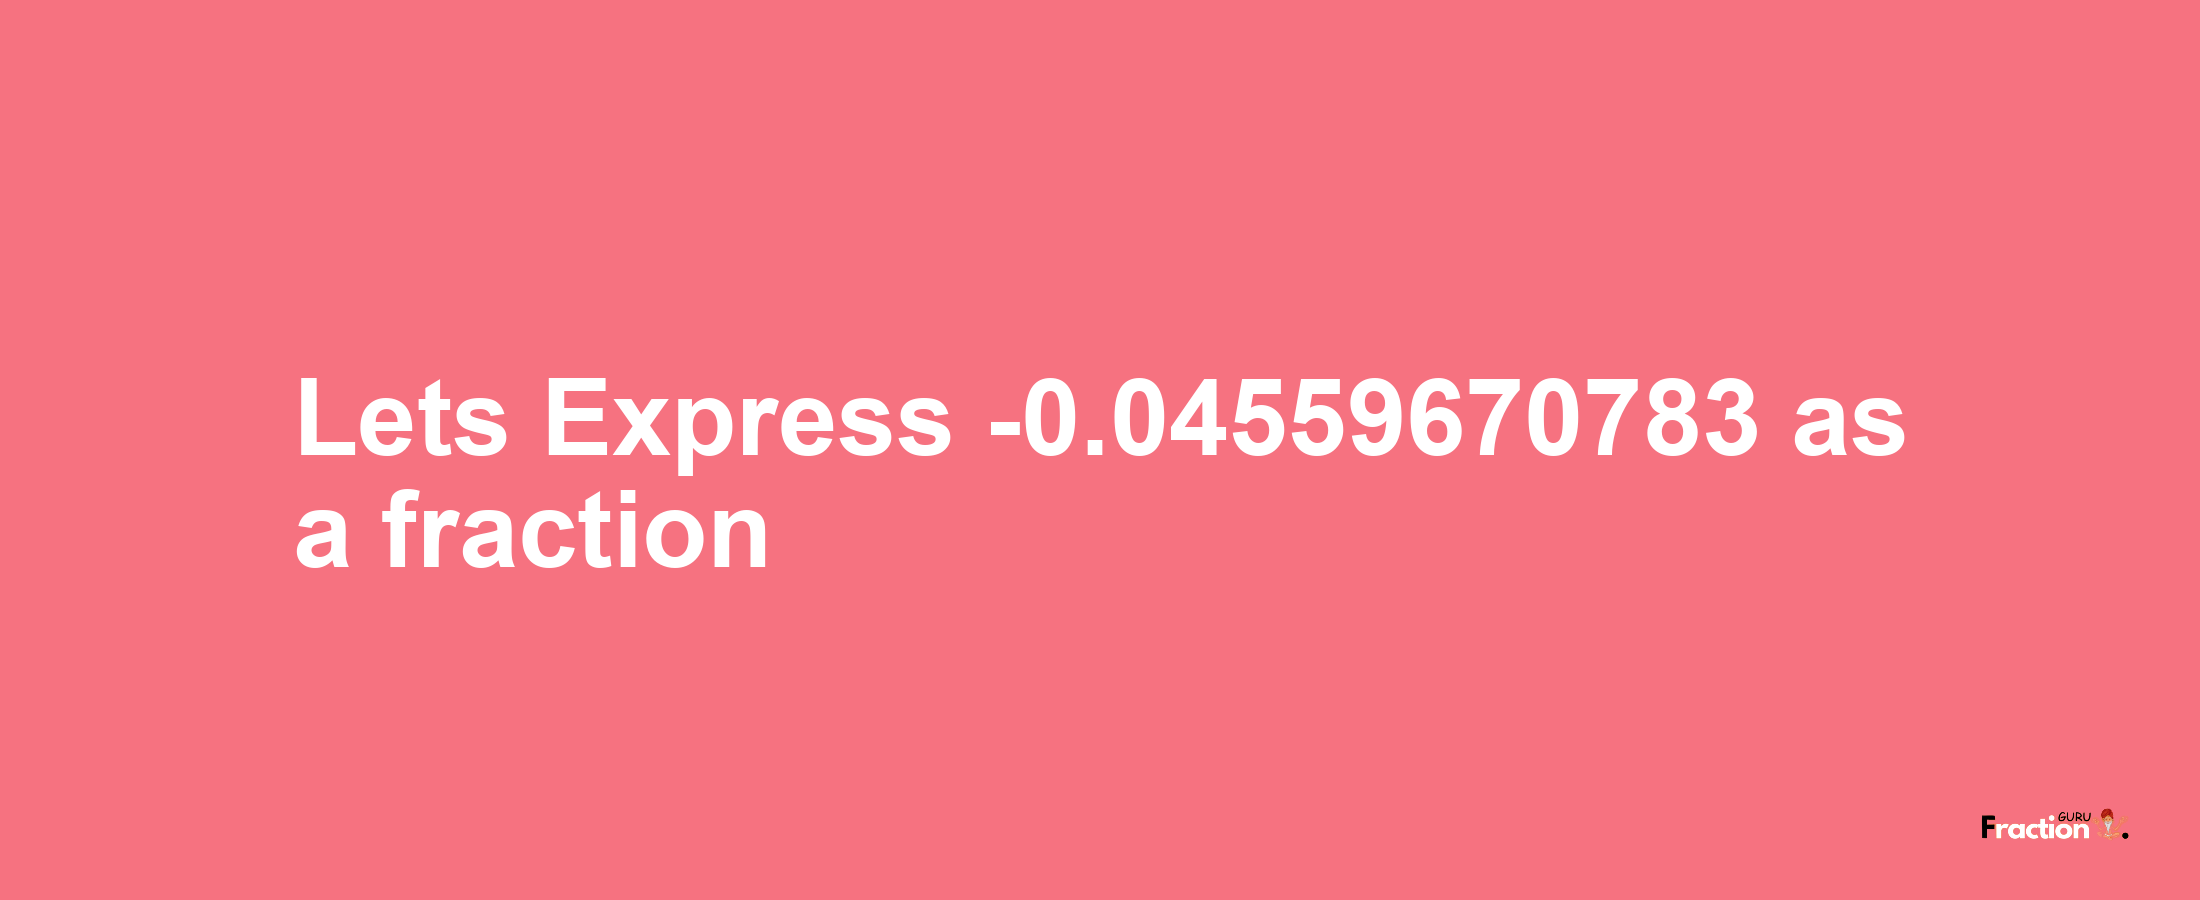 Lets Express -0.04559670783 as afraction